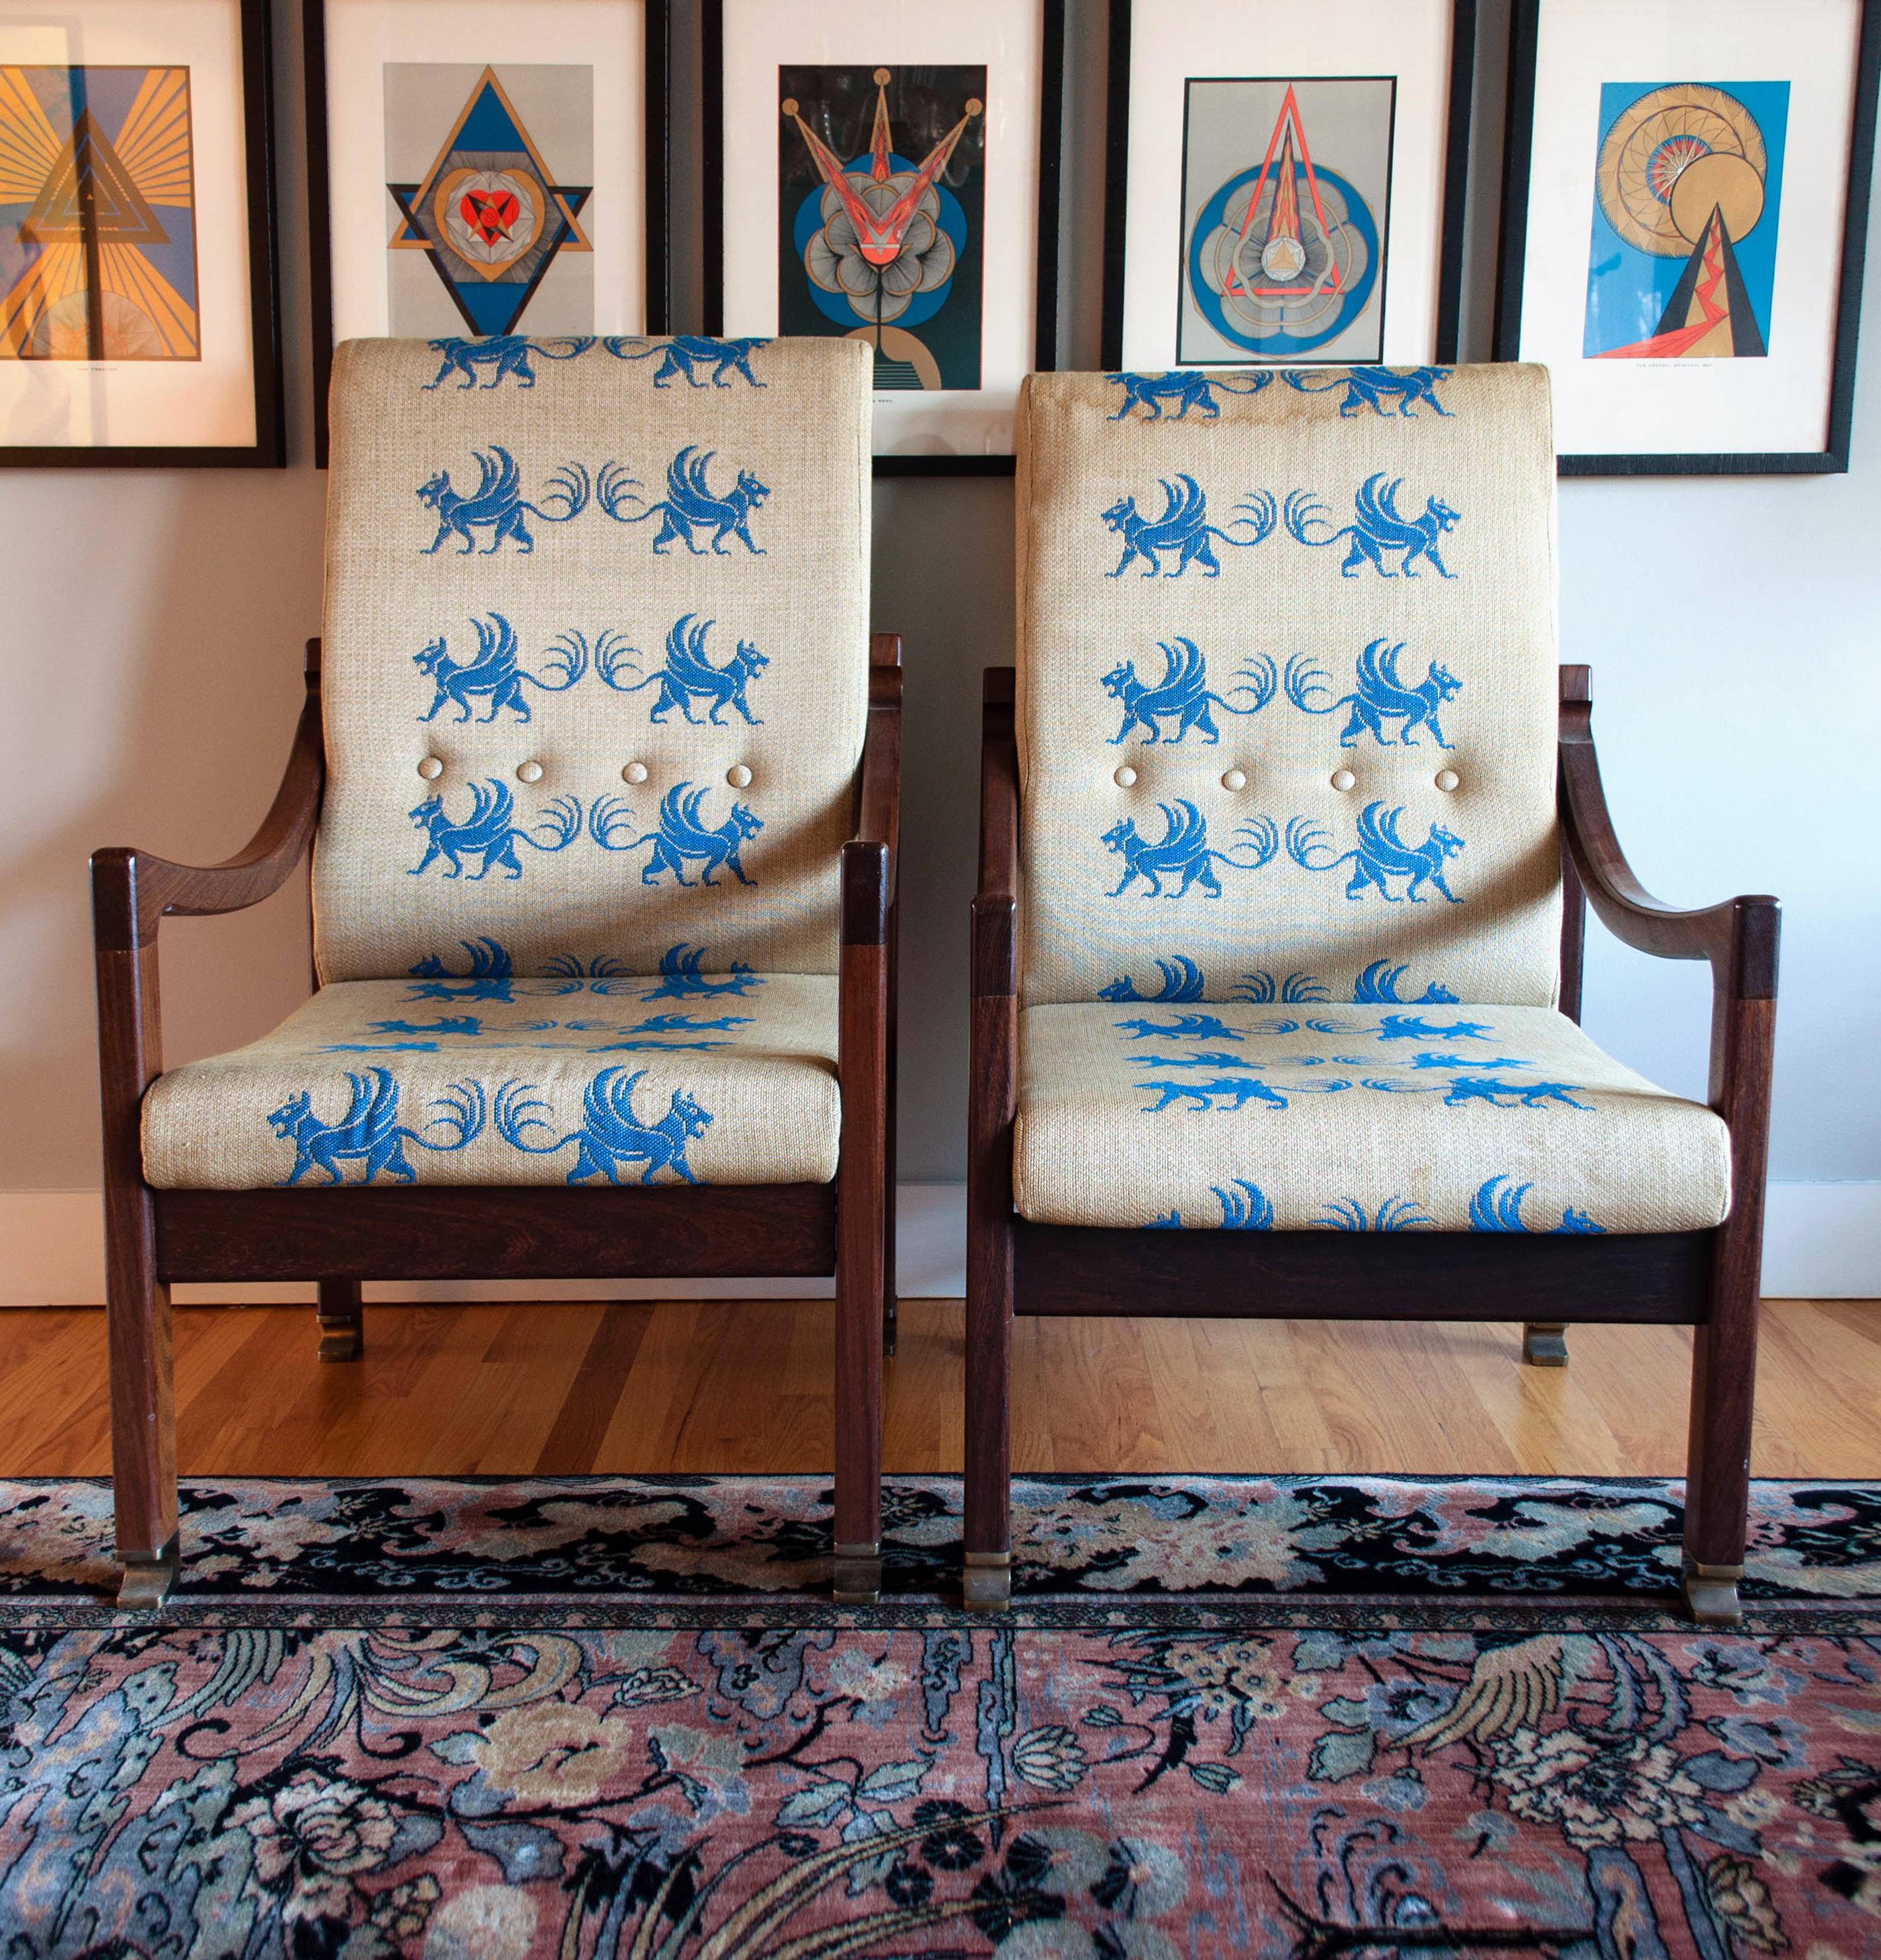 Very uncommon pair of Israeli Mr. and Mrs. chairs from the Megiddo Collection. Designed by Ib Kofod-Larsen and Mendell Selig, the chairs feature their original heraldic fabric, solid brass sabots and stamped maker’s mark on the underside. The design